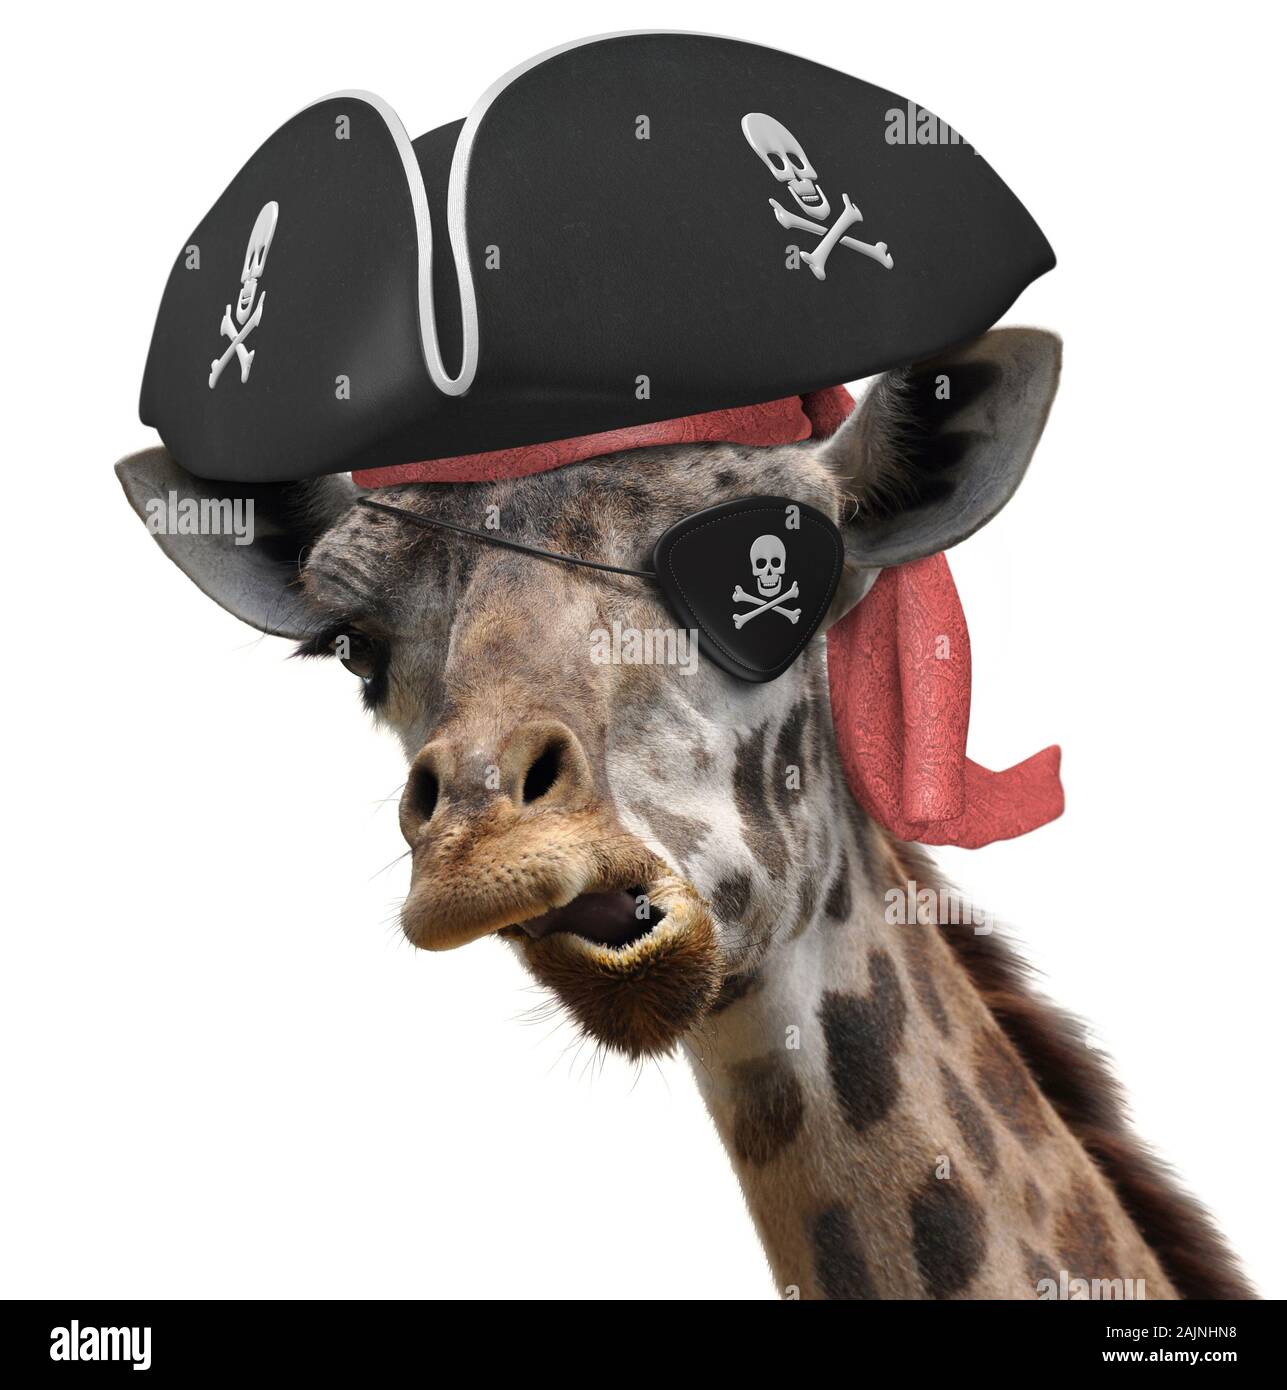 Funny animal picture of a cool giraffe wearing a pirate hat and eyepatch with crossbones Stock Photo